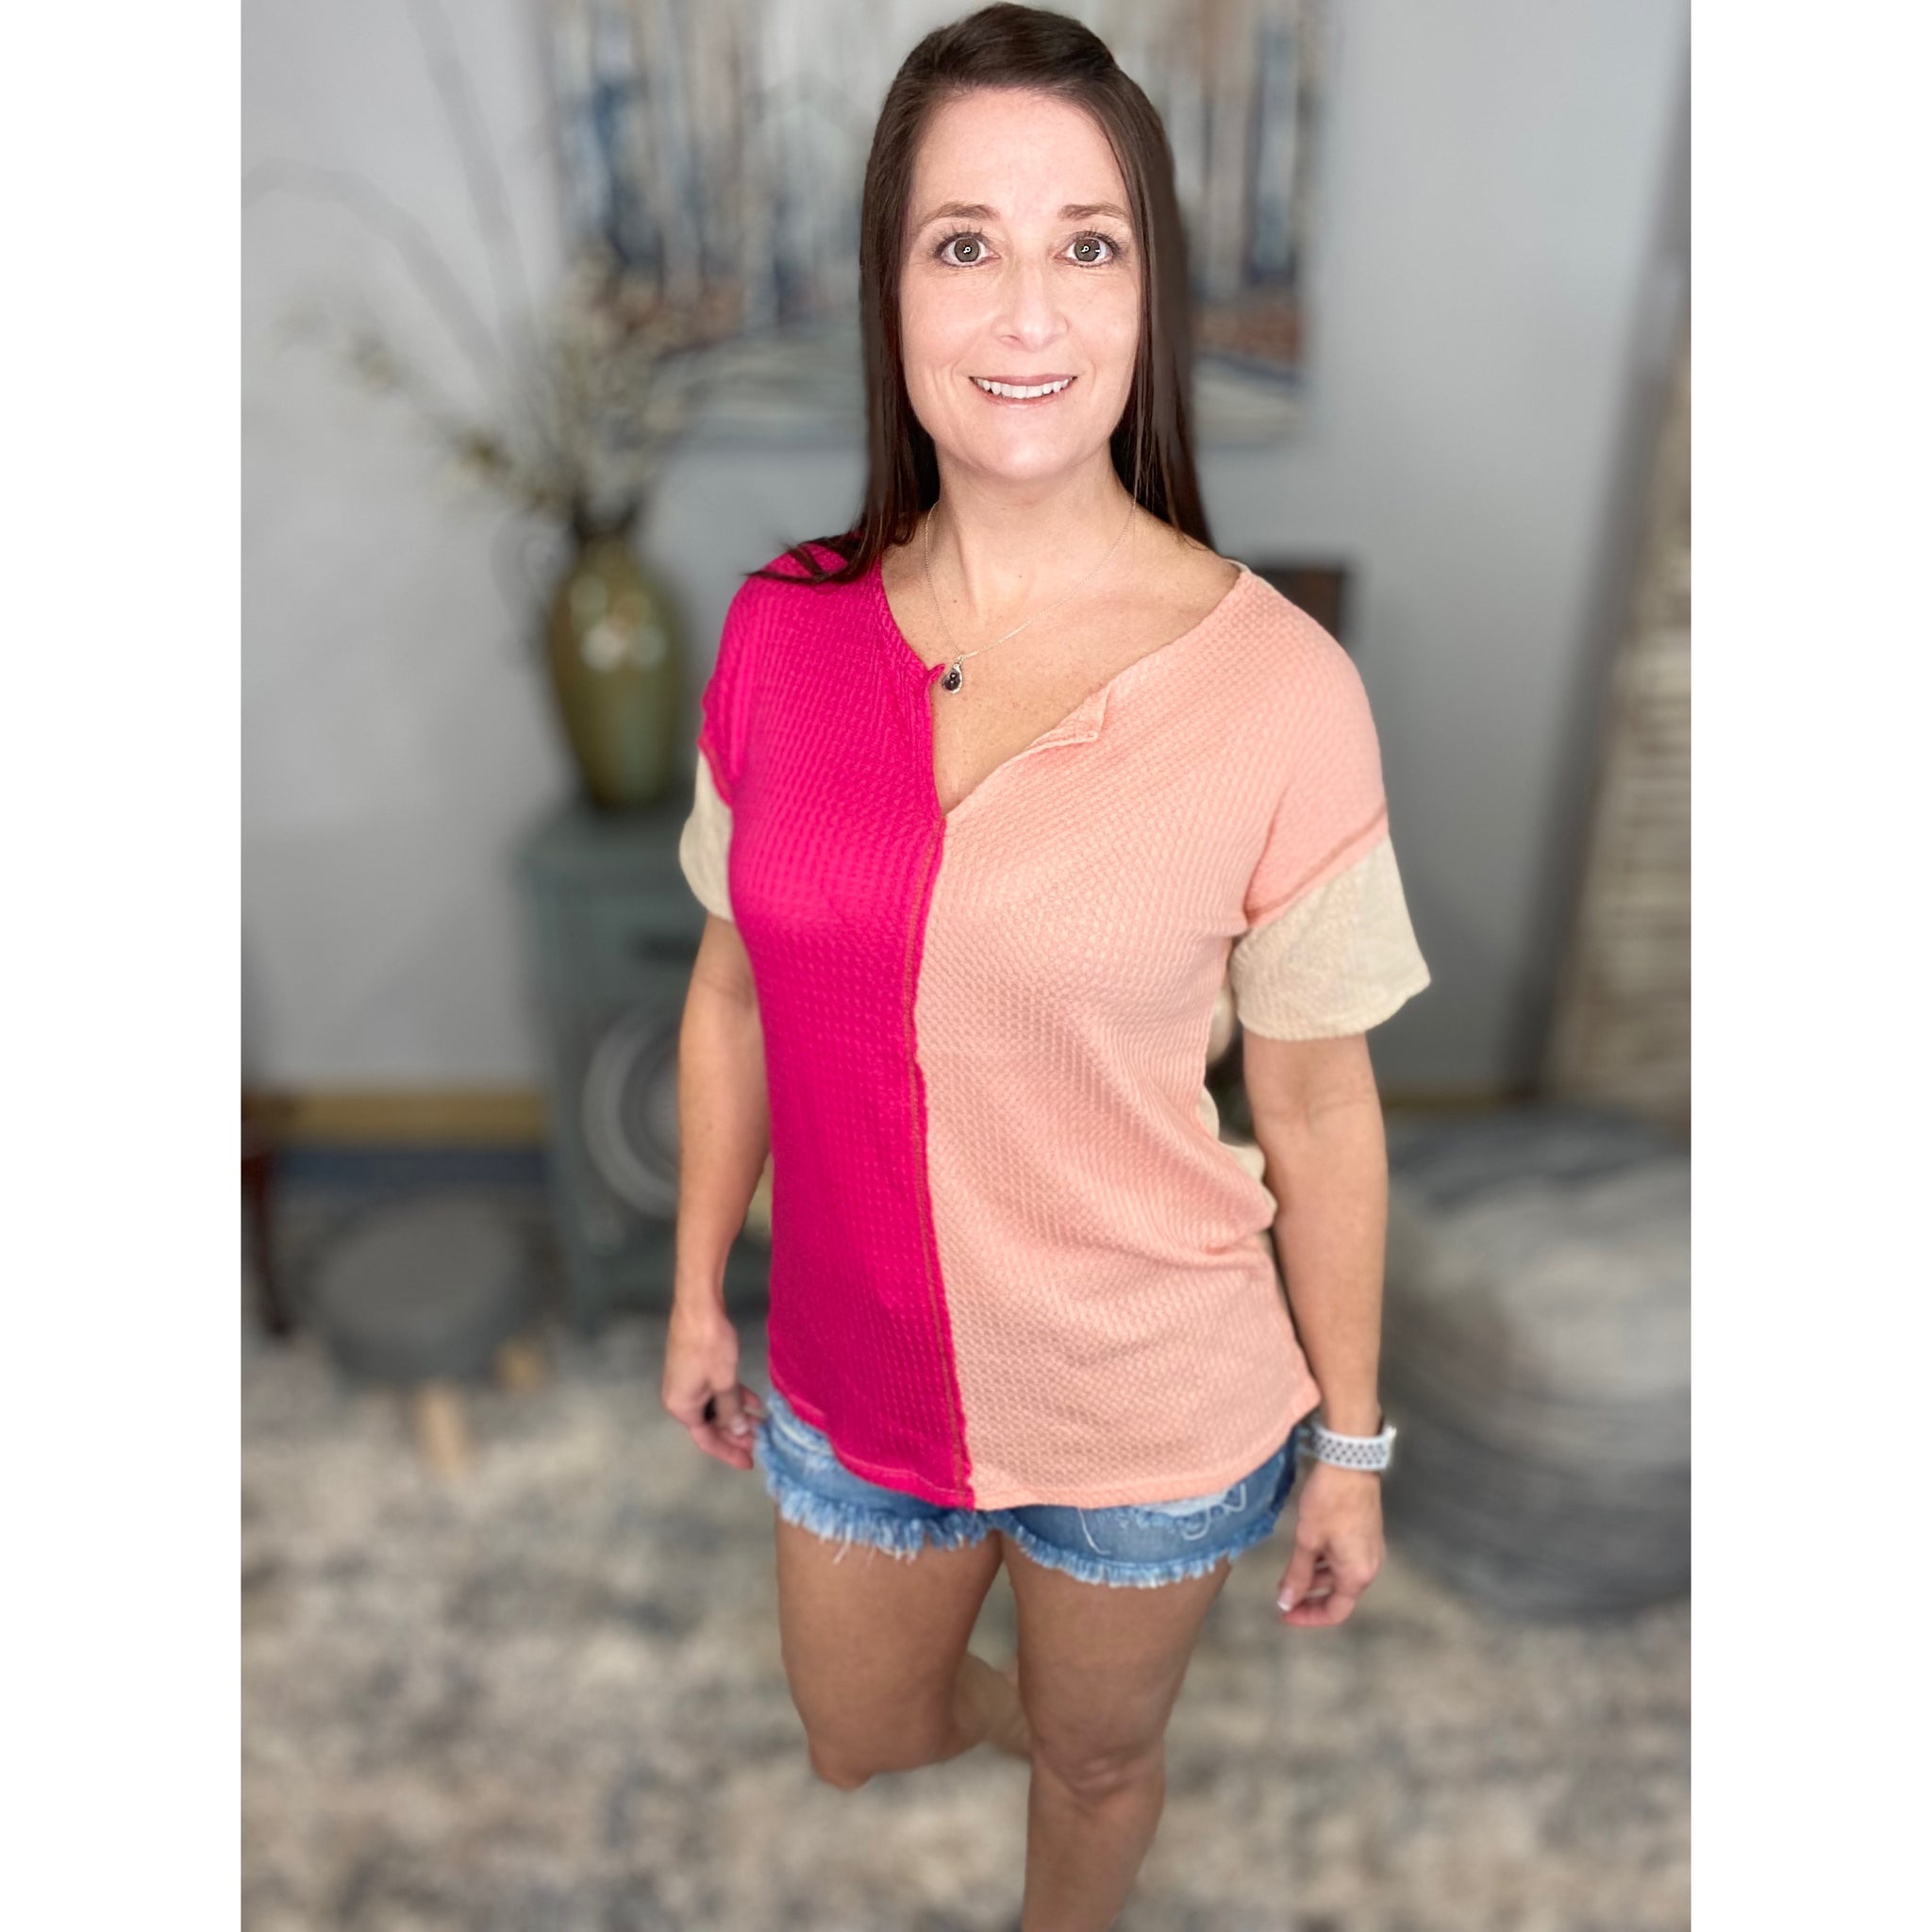 “Fire & Ice" Color Block V-Neck Waffle Light Inside Out Stitching Pink S/M/L/XL